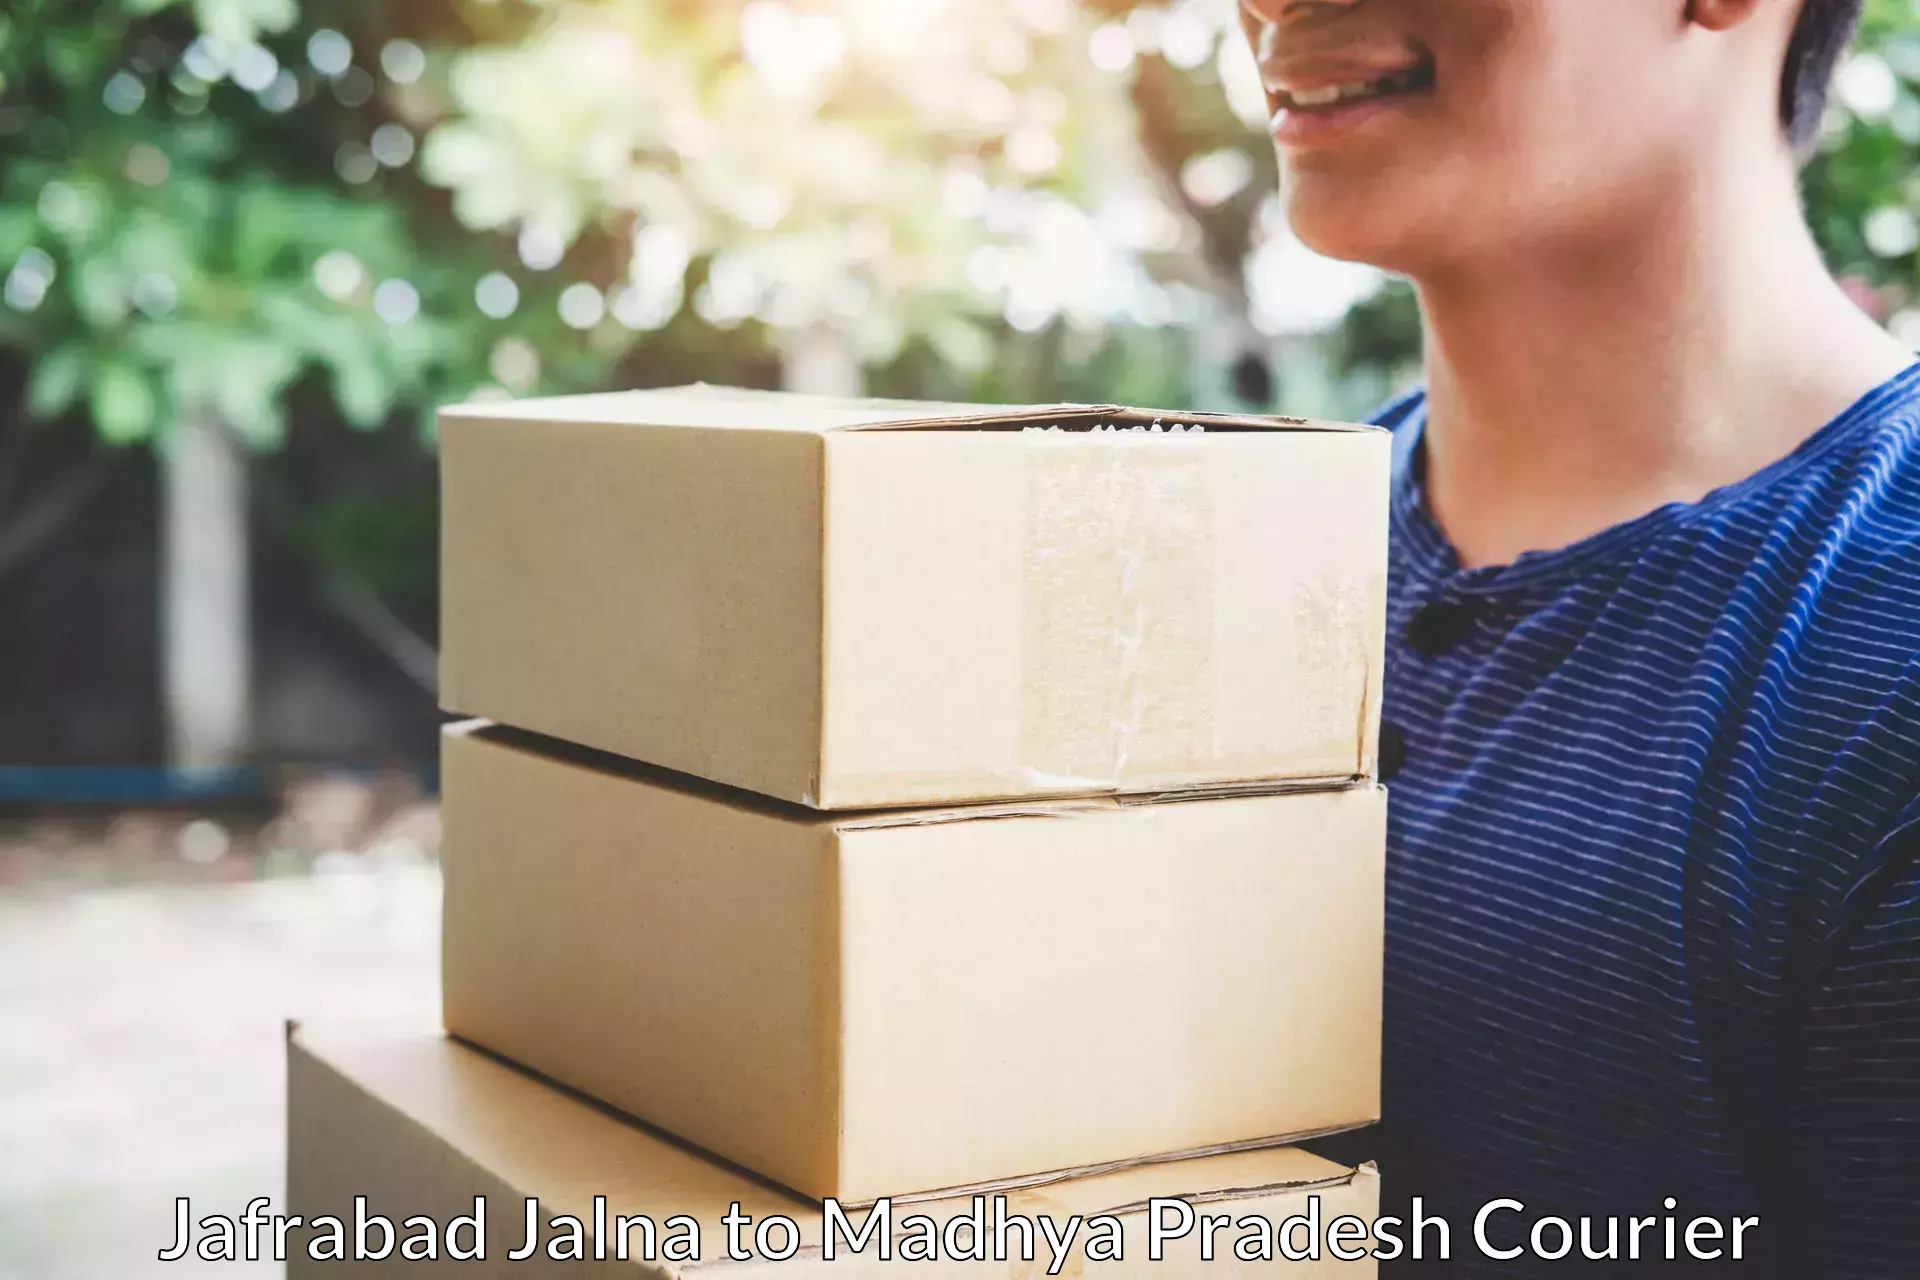 Quality moving services Jafrabad Jalna to Rajgarh